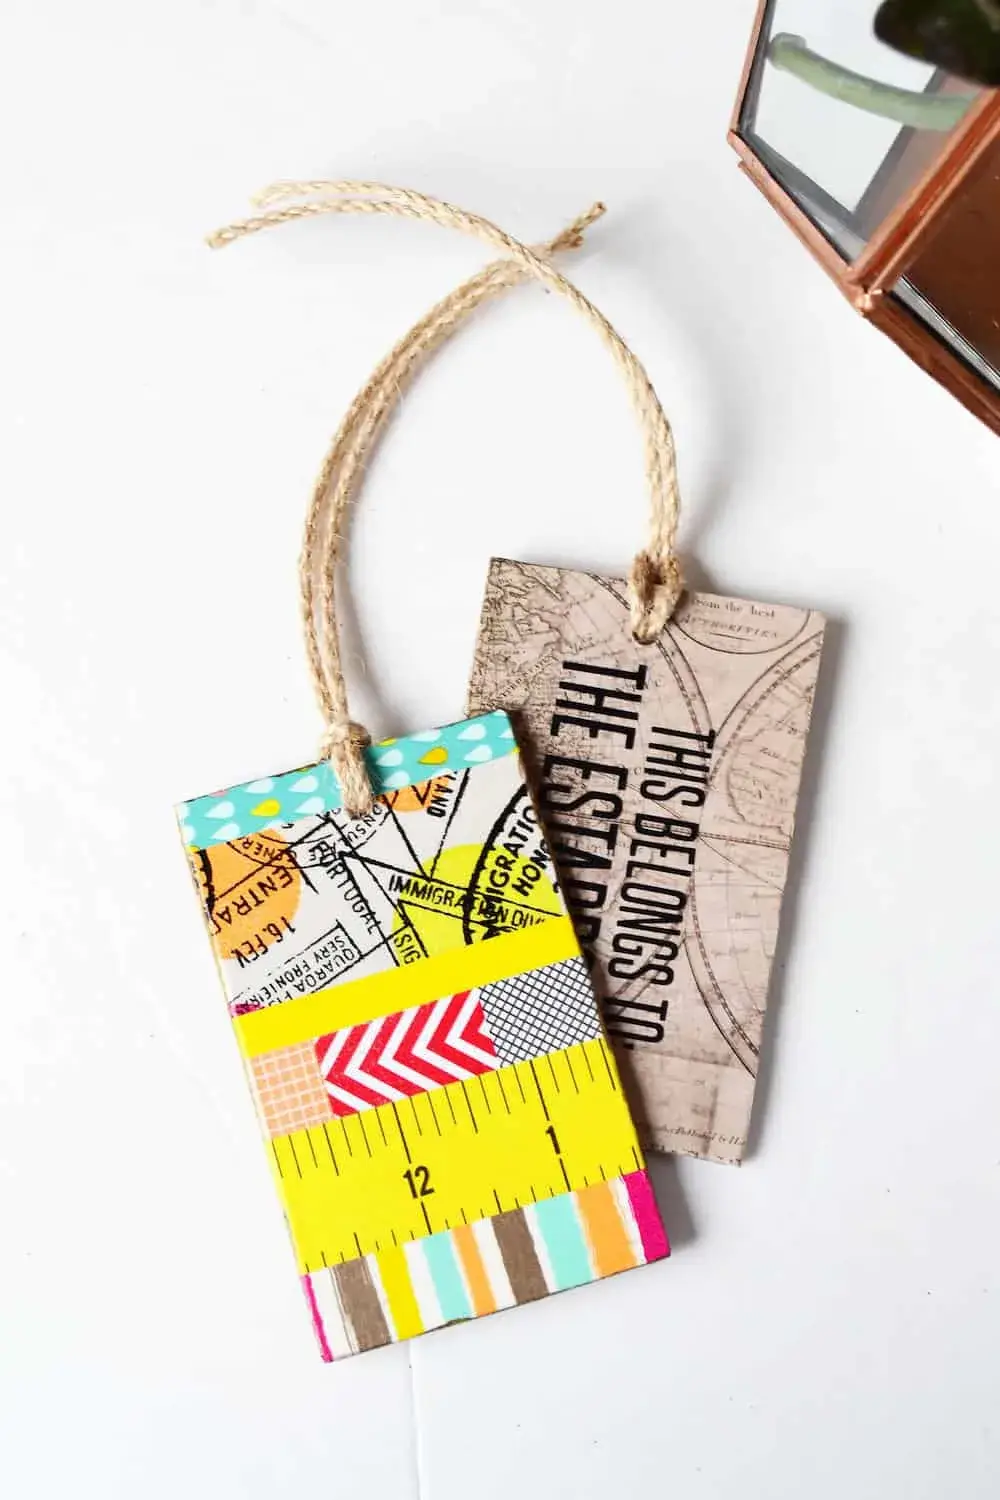 Handmade Luggage Tags Craft With Washi Paper Tape